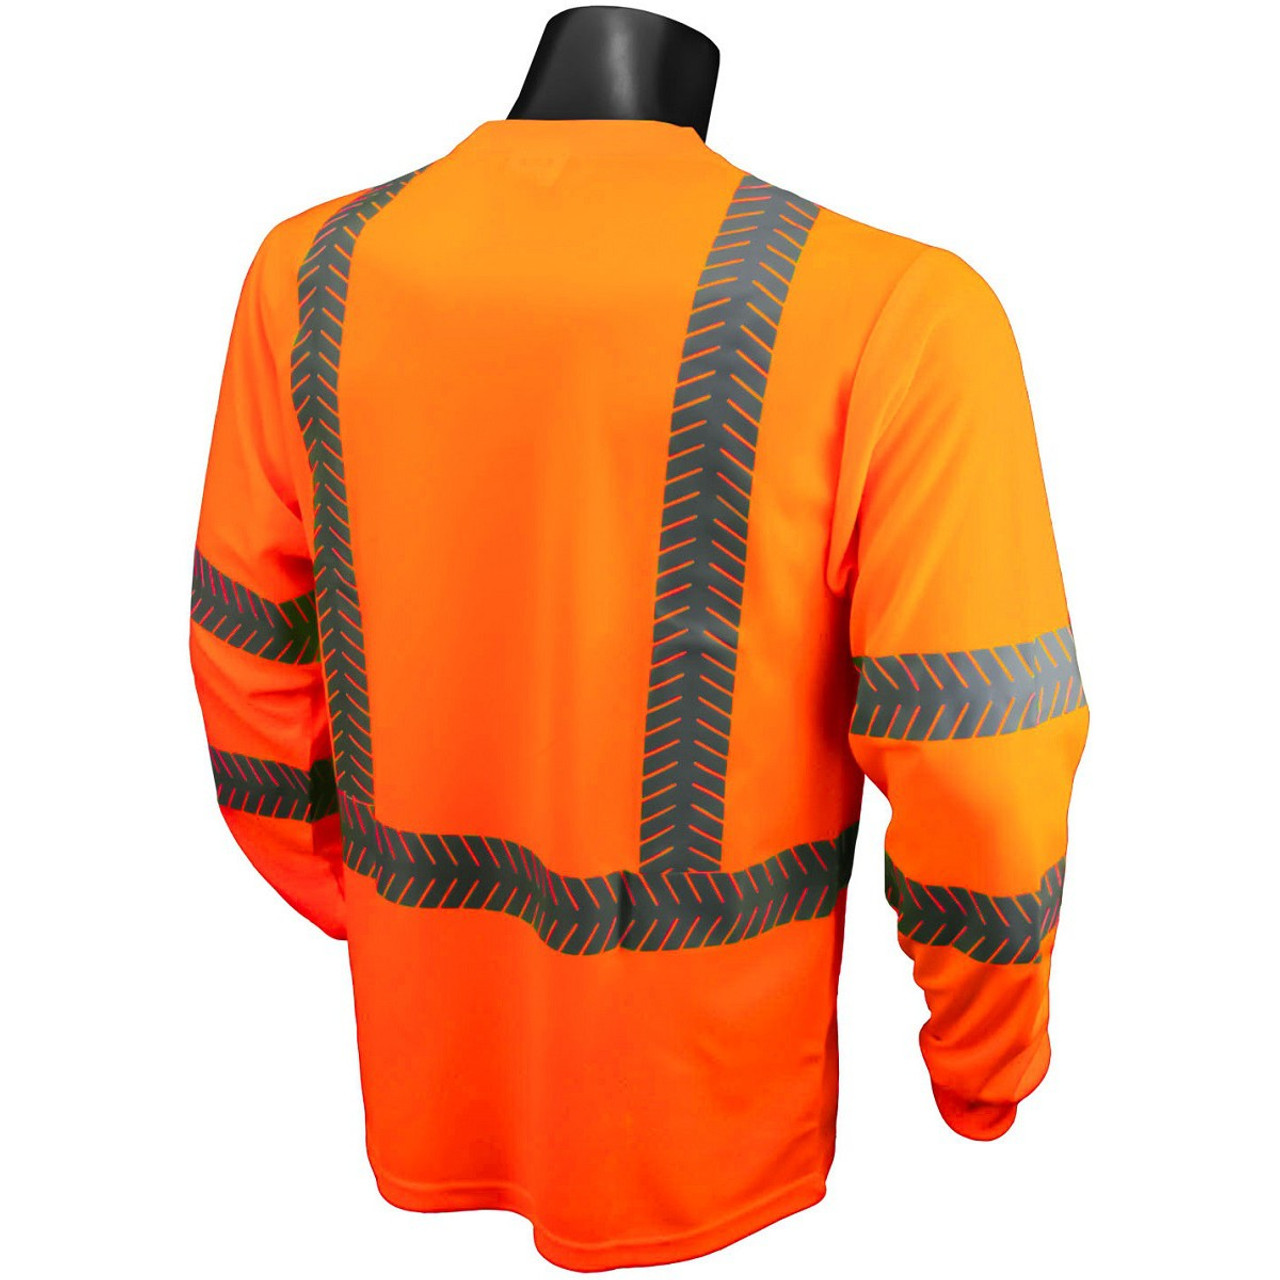 Radians ST24-3 Type R Class 3 Mesh Safety Shirt with UV Protection - Orange - BACK